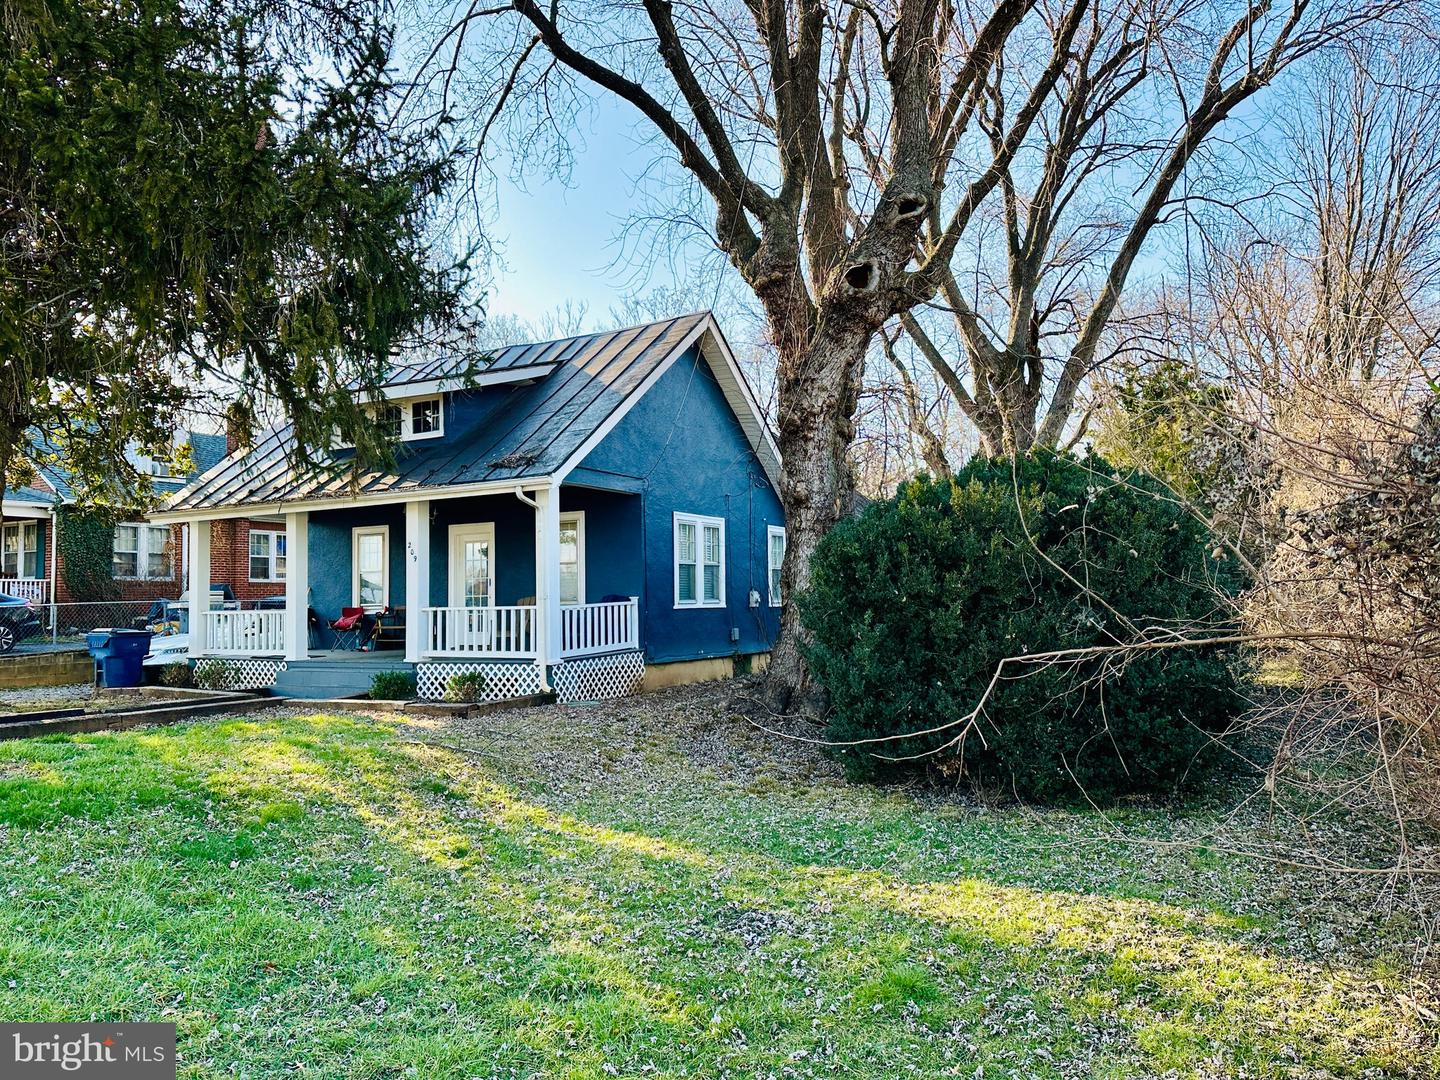 209 FIRST ST, BERRYVILLE, Virginia 22611, 2 Bedrooms Bedrooms, 5 Rooms Rooms,1 BathroomBathrooms,Residential,For sale,209 FIRST ST,VACL2002454 MLS # VACL2002454